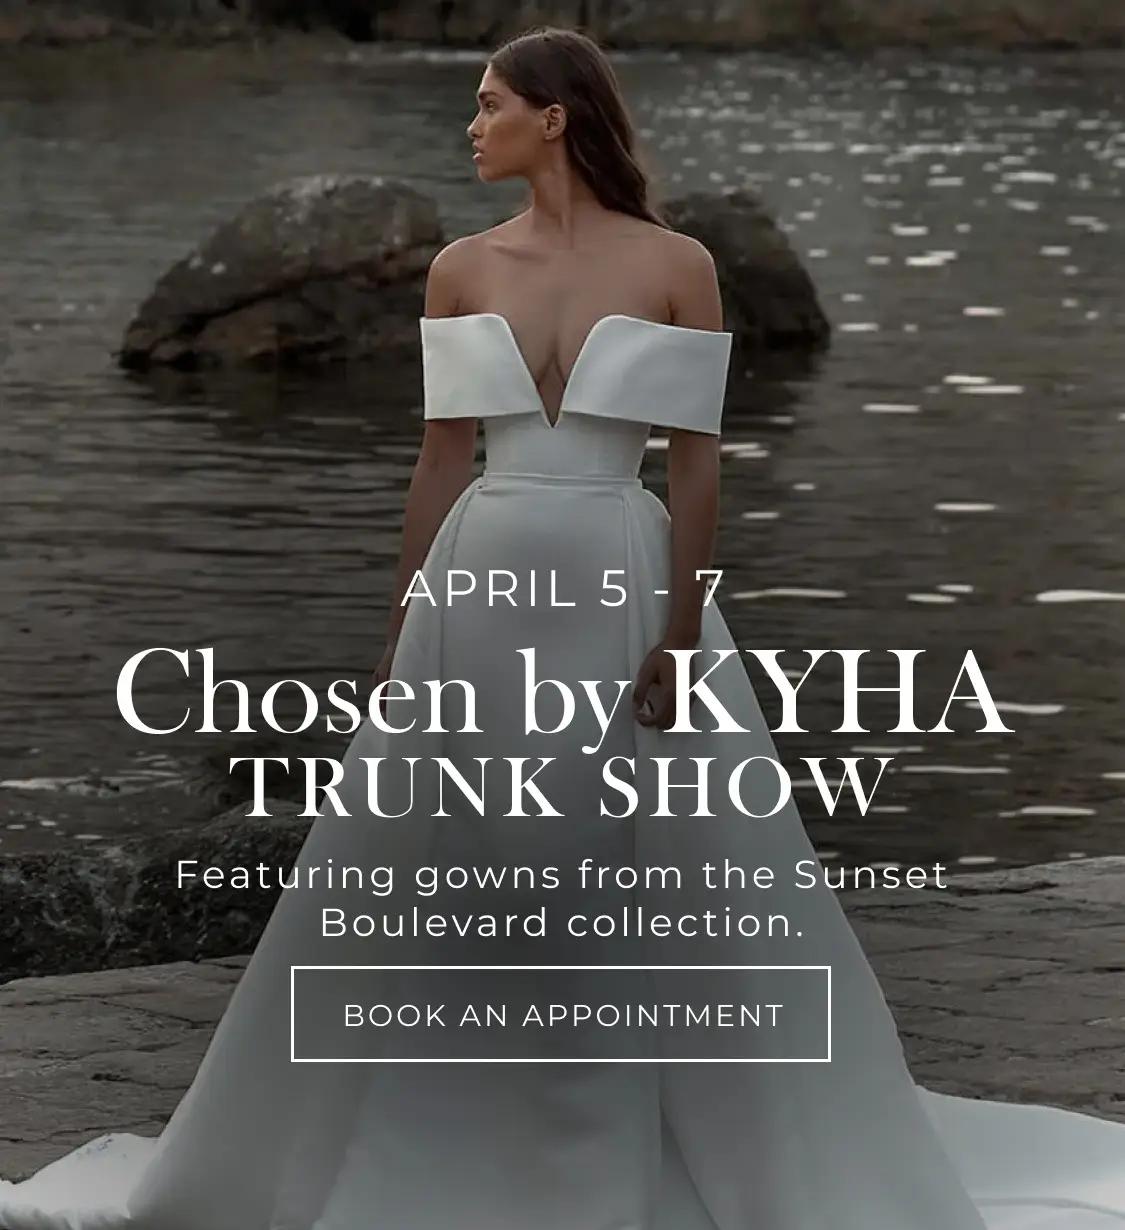 Chosen by Kyha trunk show banner for mobile